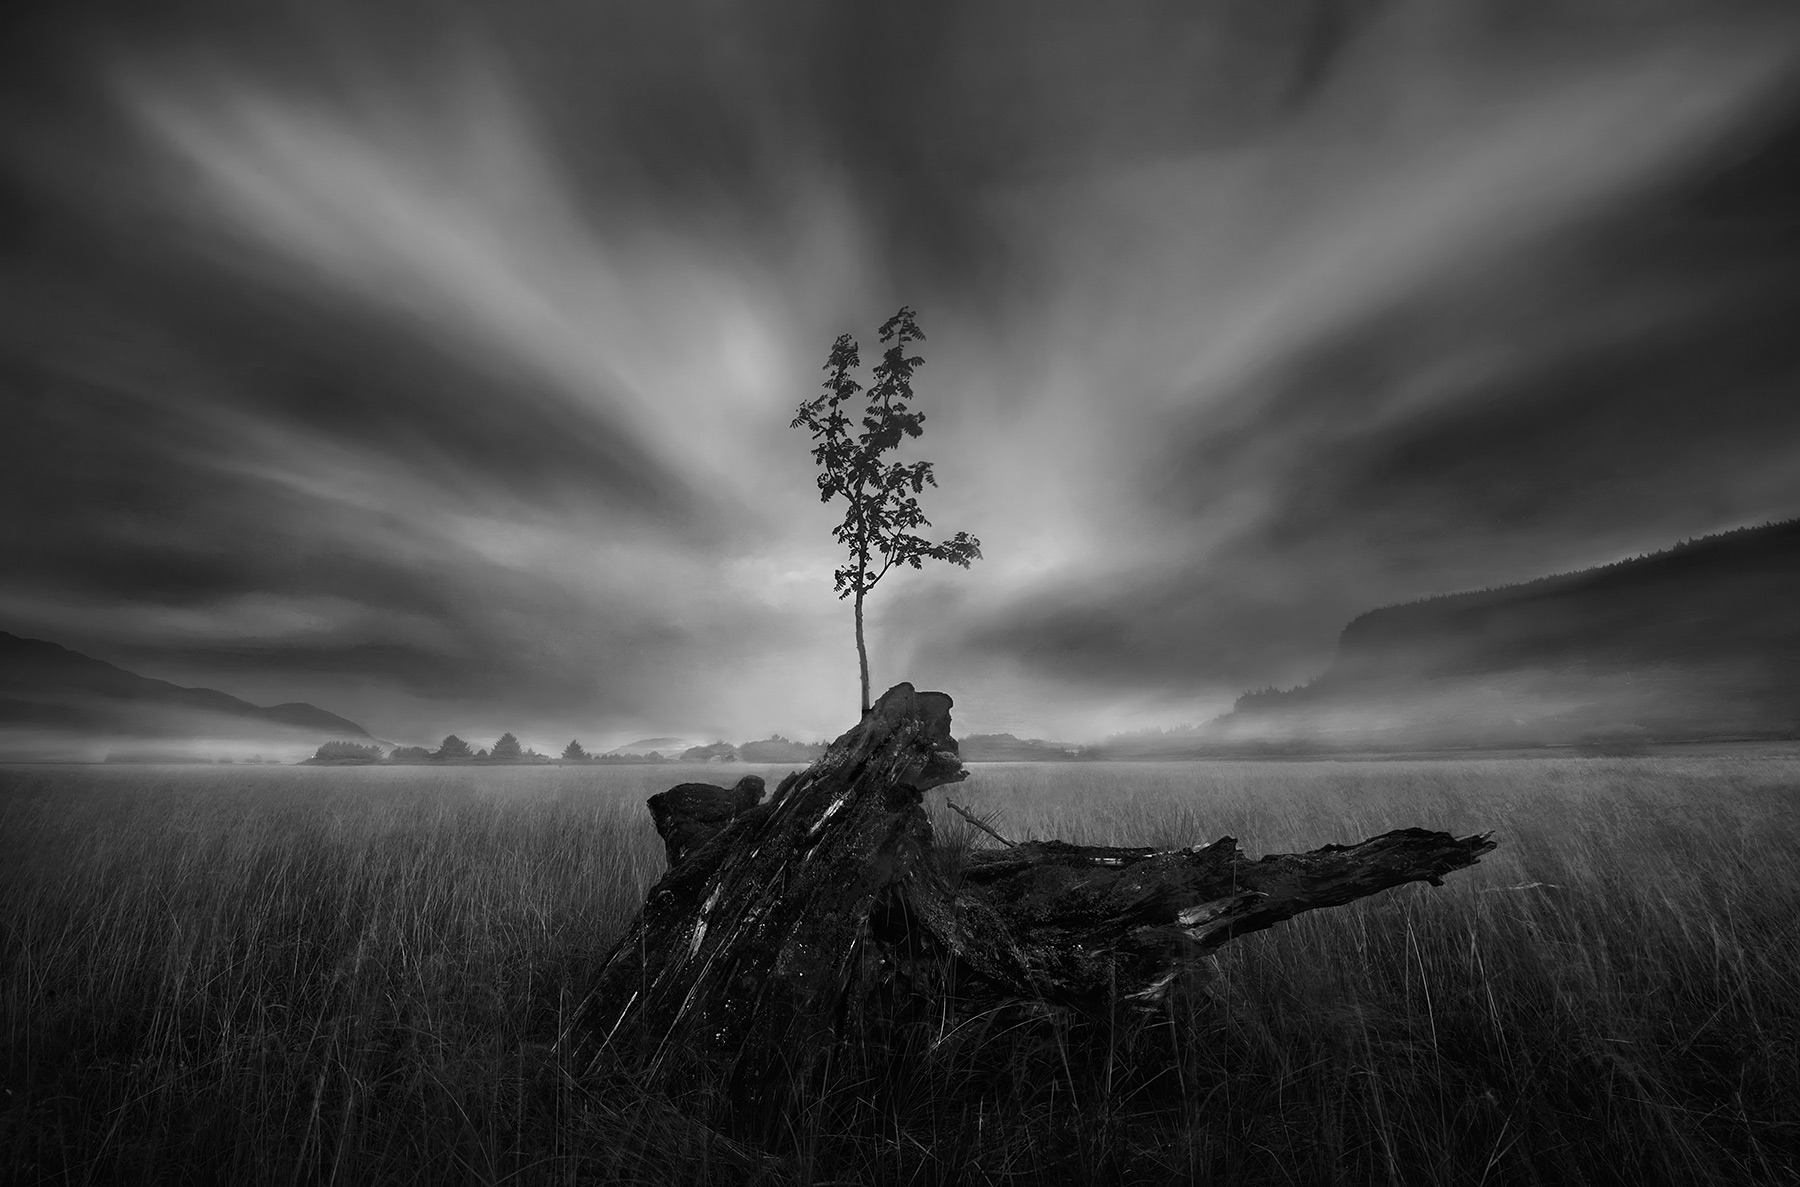 Life of a new tree rises from the old. The story of life renewed. A black and white presentation with cloud motion from a long...